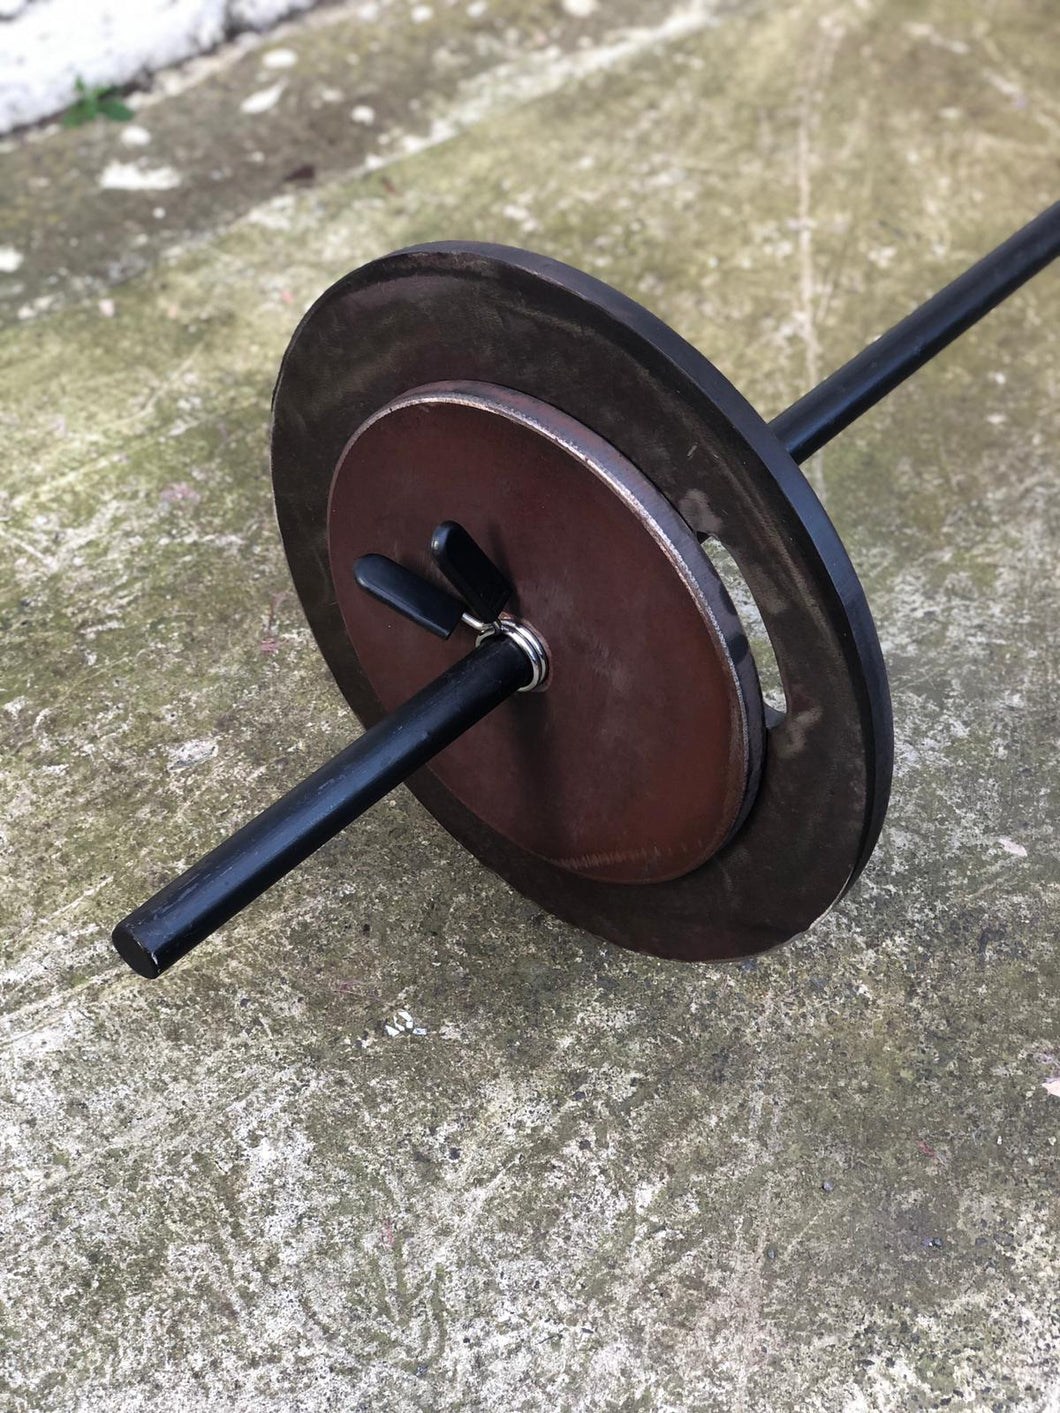 1 - inch bar and 30kg of weights.